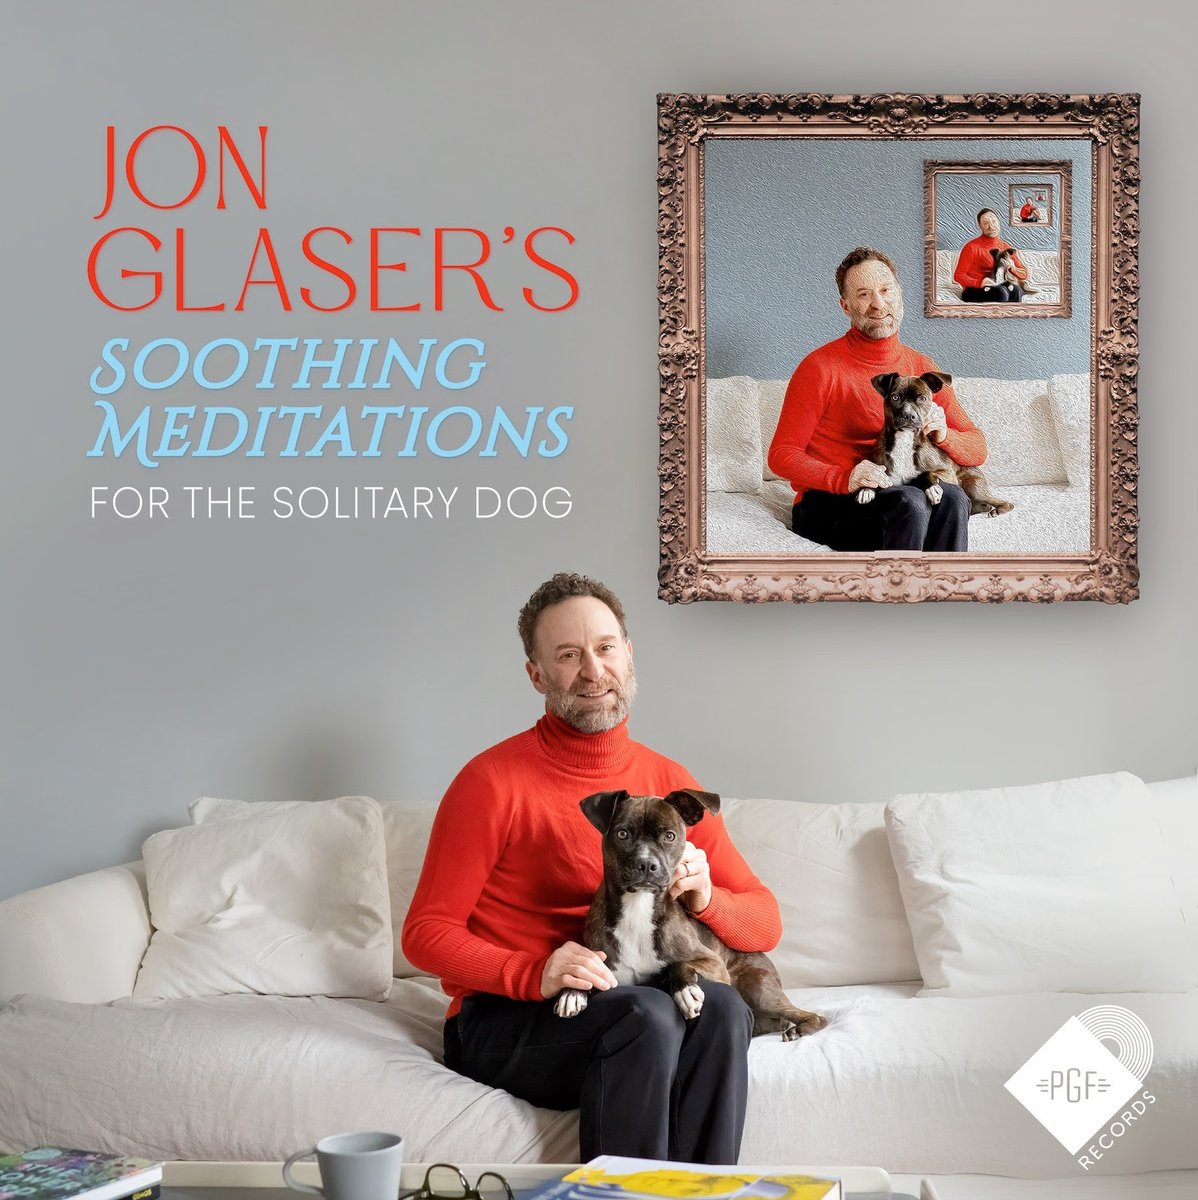 🐕TONIGHT!🐕 @PGoodFriends Presents Jon Glaser's Album Release Party! Come join Jon Glaser to celebrate the launch of his new dog-inspired comedy album, featuring @EugeneMirman & More! 6:30PM VIP Doors ∙ 7PM GA Doors ∙ 7:30PM Show Last Tickets Left: tinyurl.com/5n7teej4